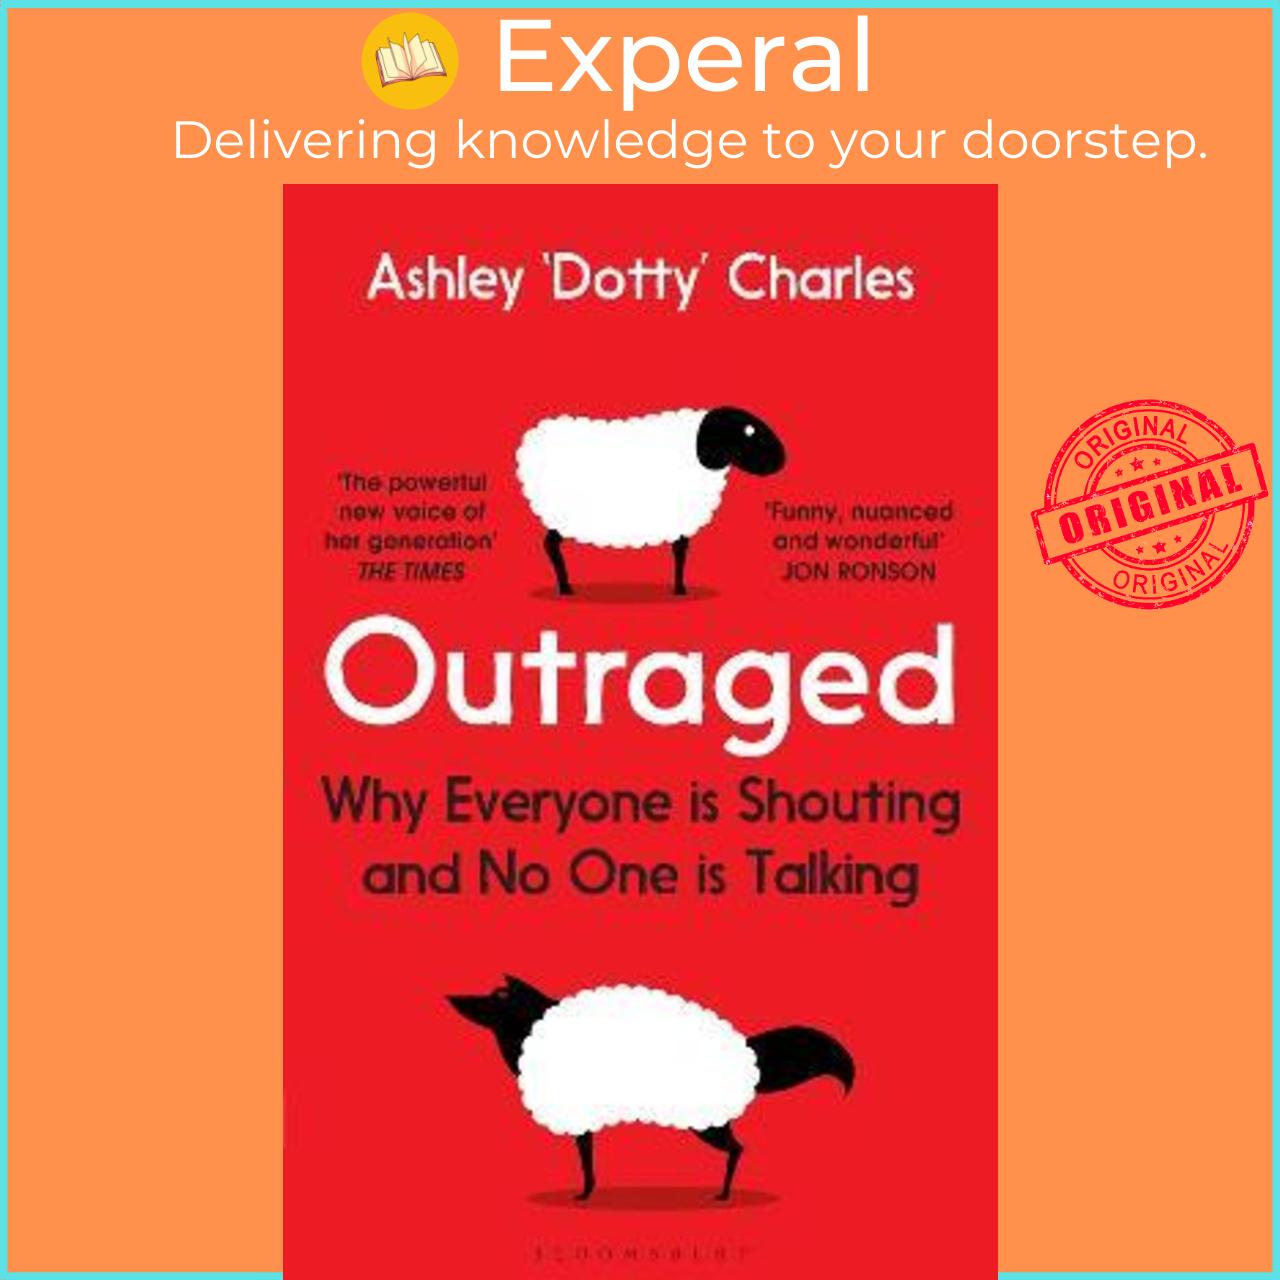 Sách - Outraged : Why Everyone is Shouting and No One is Talking by Ashley 'Dotty' Charles (UK edition, paperback)